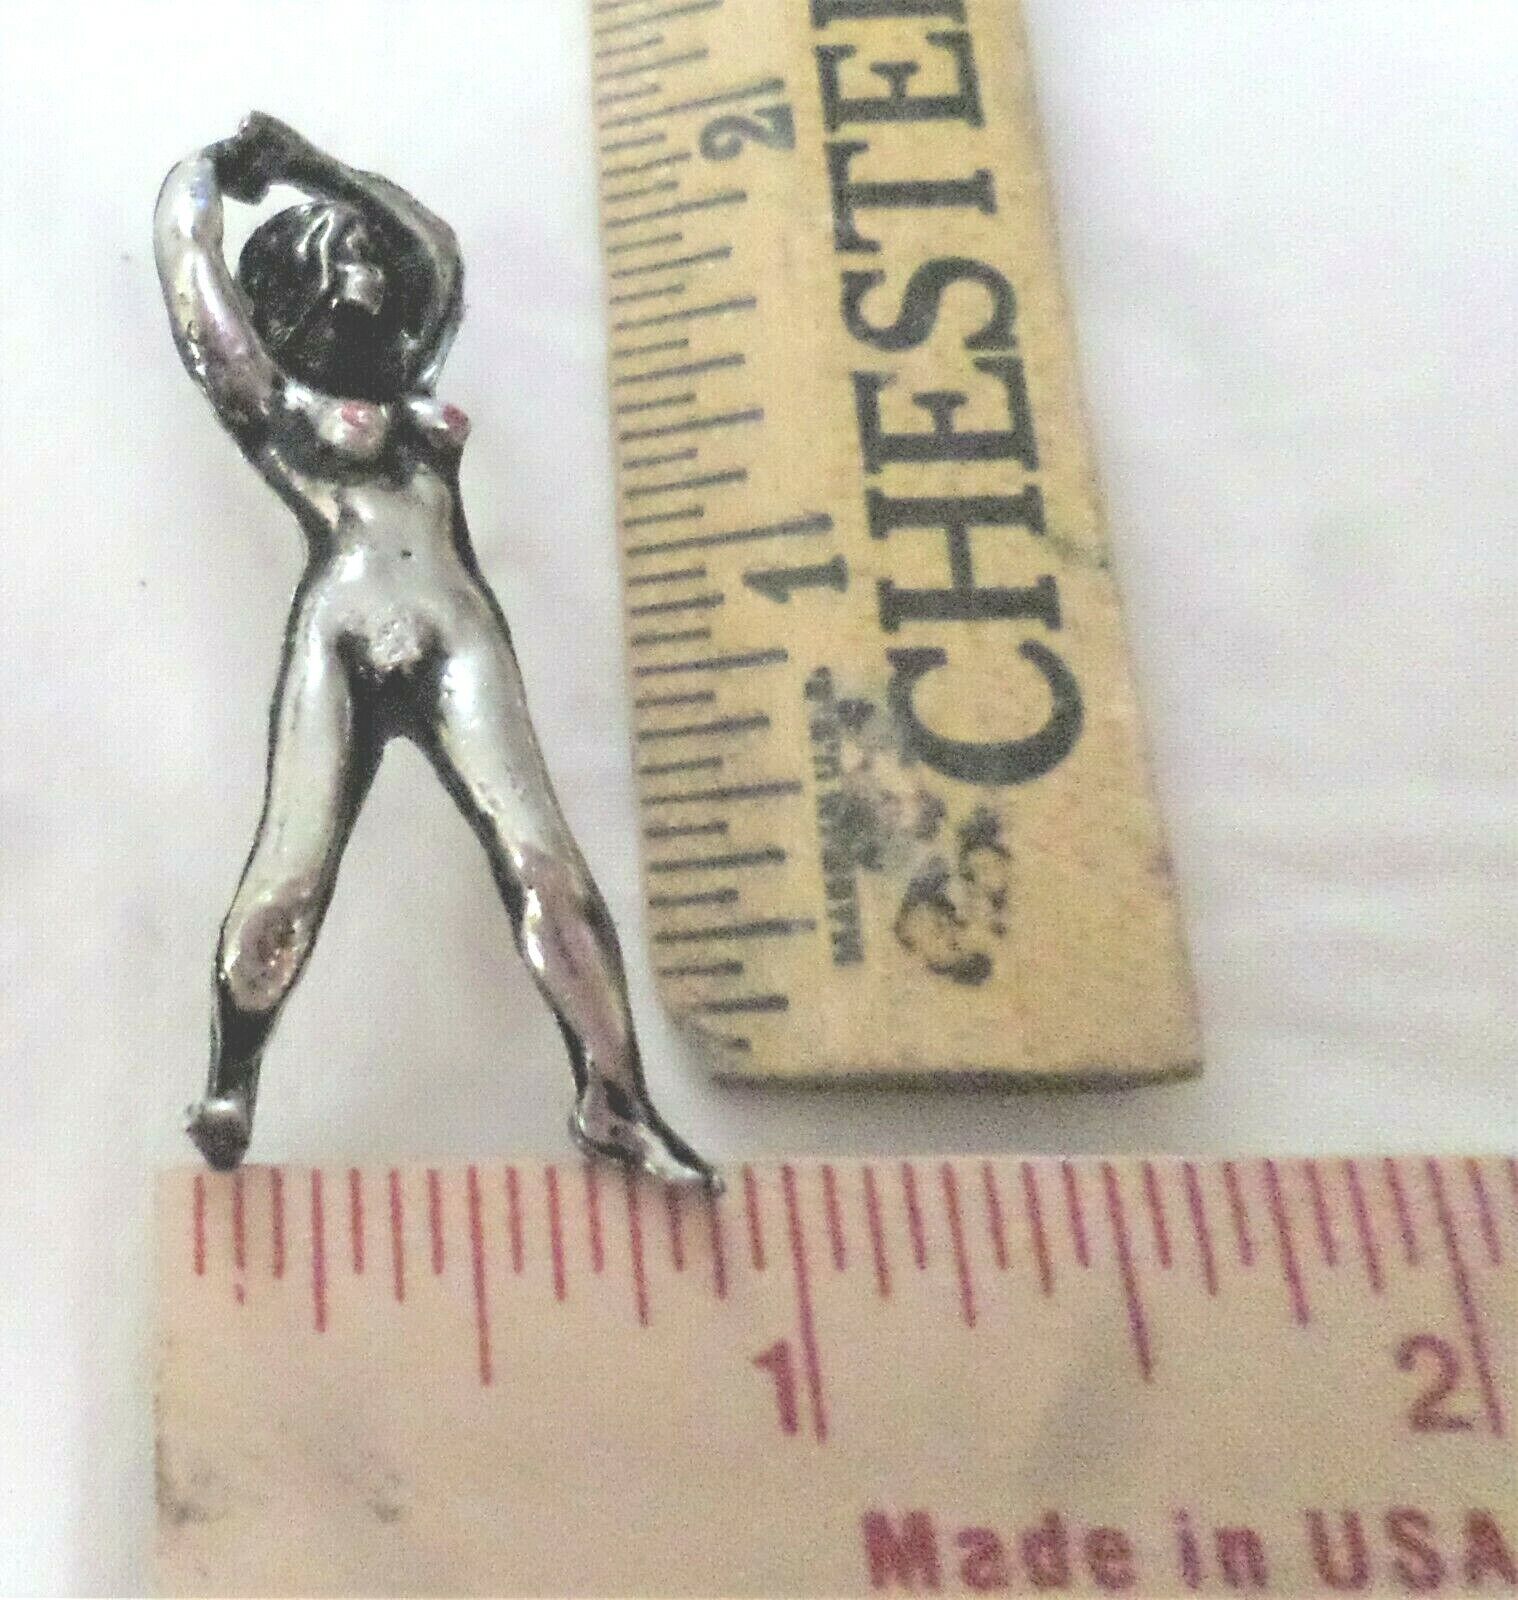 naked girl pin vintage collectible old biker vest lady woman chick pinback